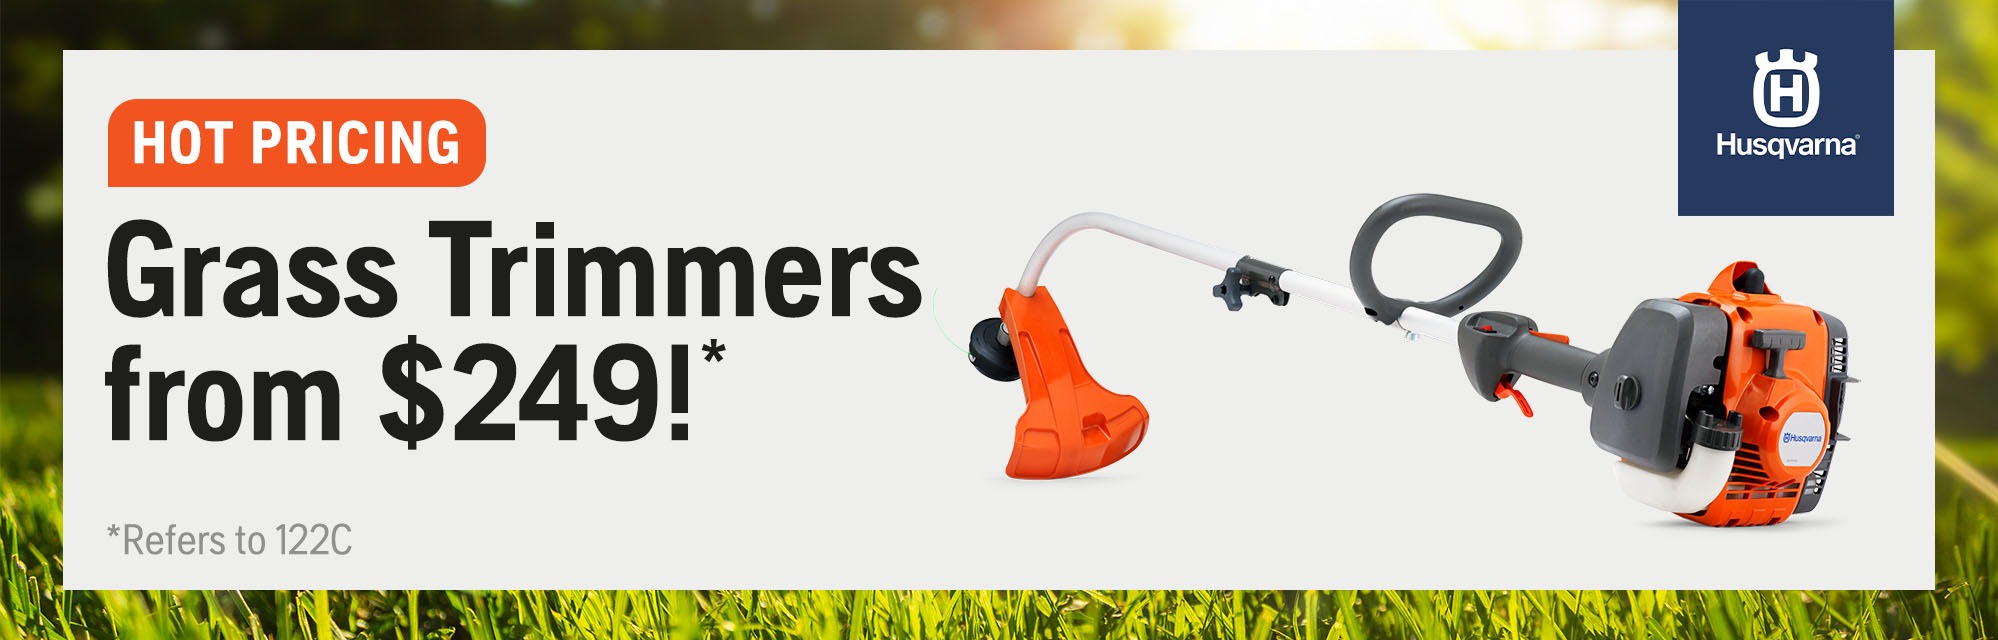 1. Hot Price - Trimmers